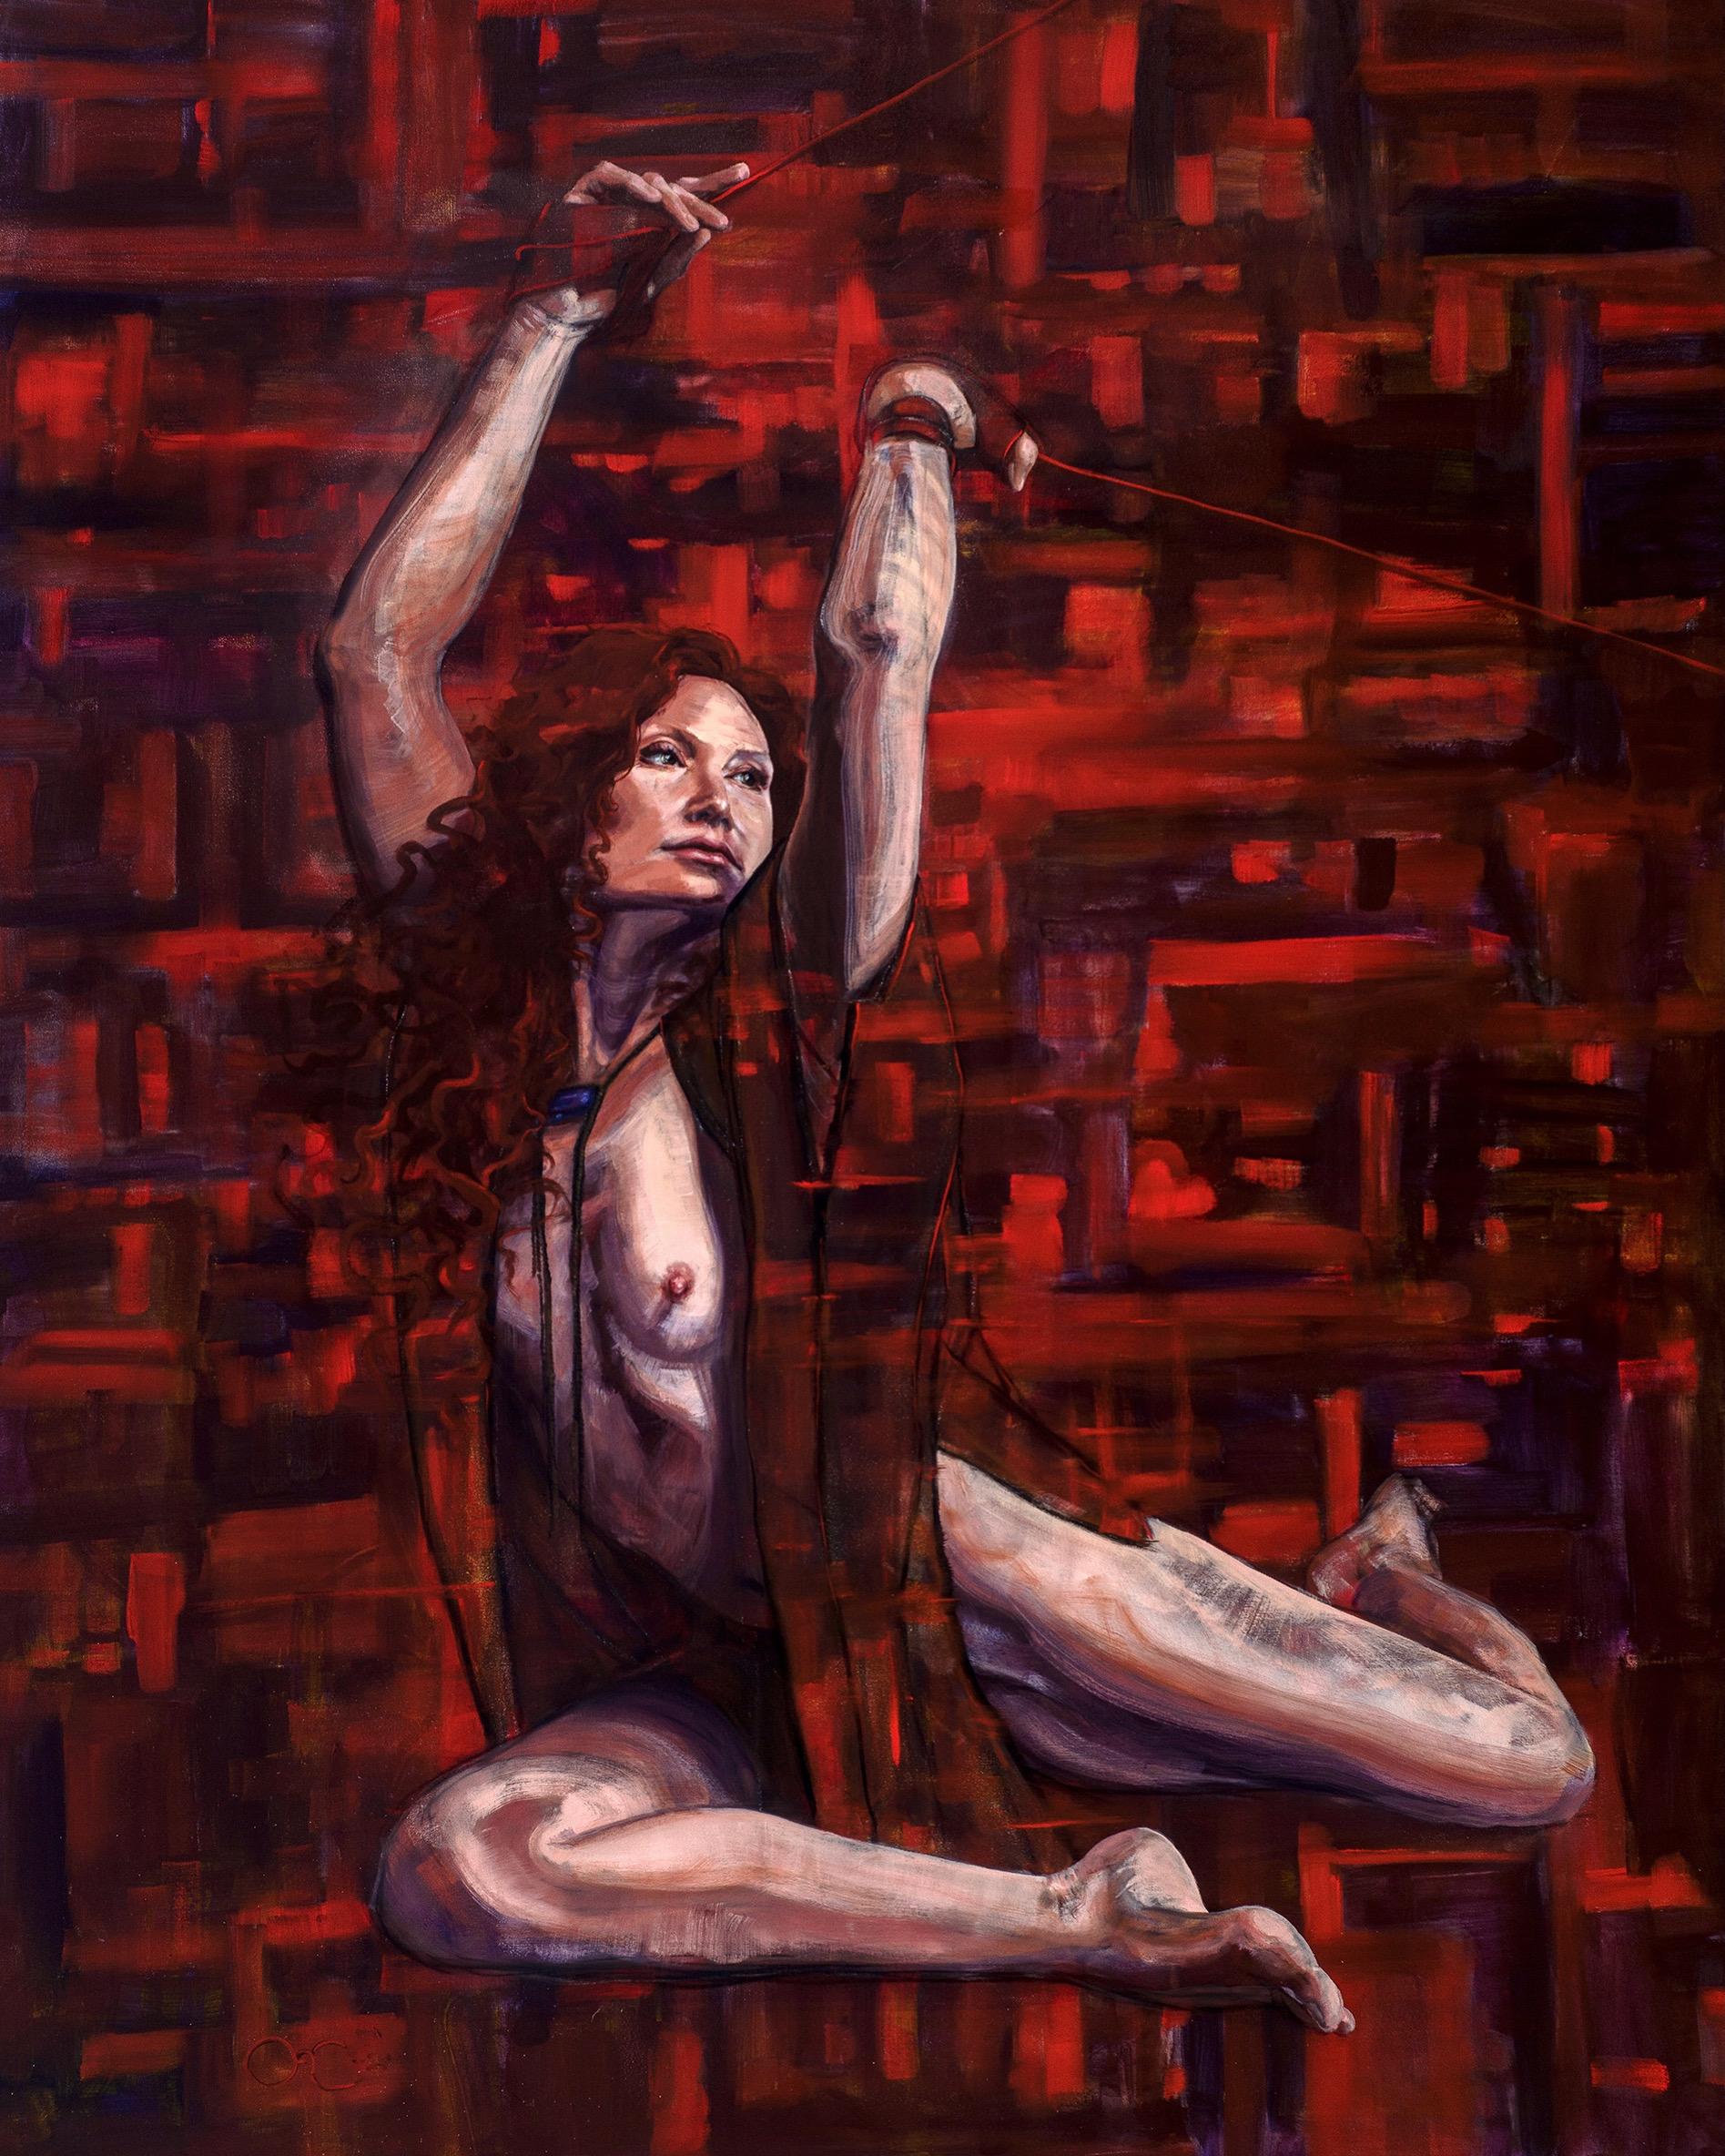 Orielle Caldwell Nude Painting - 'Sovereign' Large Oil Painting by Orielle - Female Nudes Art